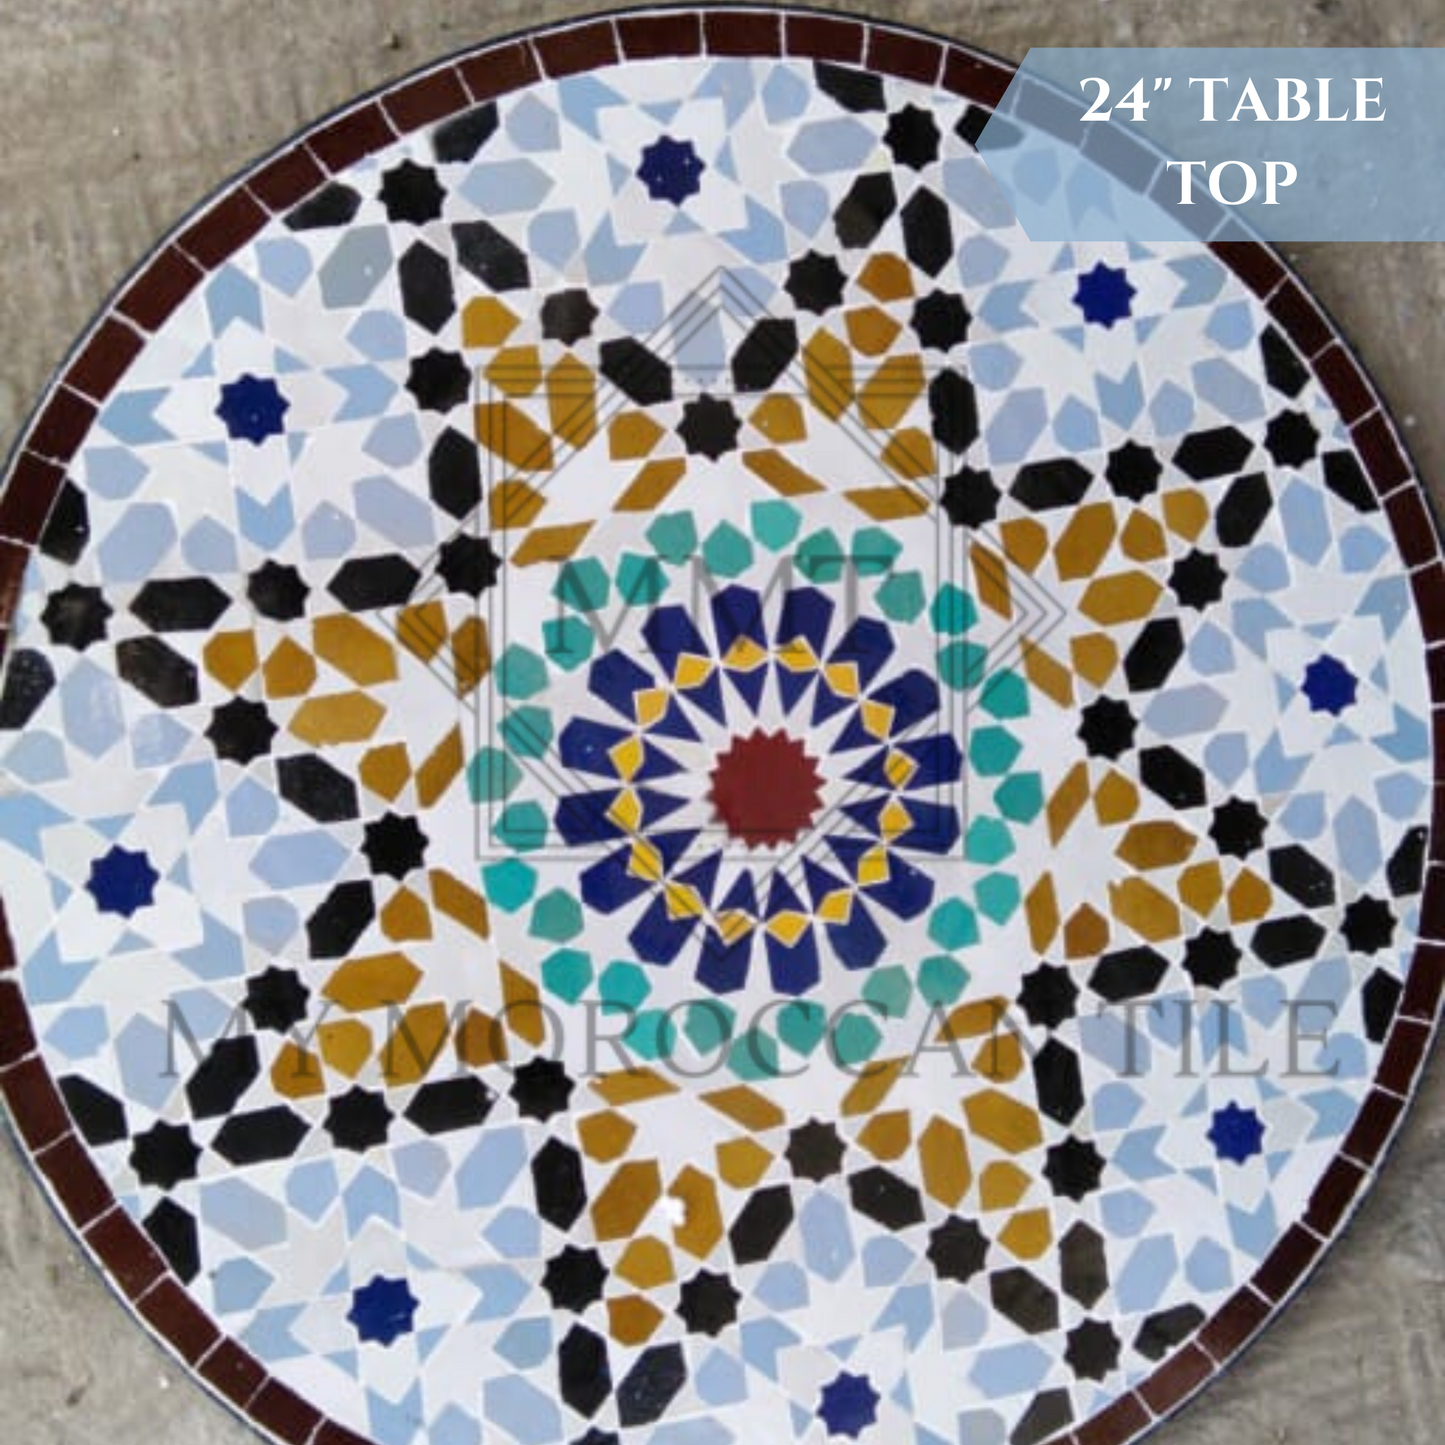 Beautiful outdoor Moroccan mosaic table top 24" or 60cm . Handmade, custom color and size in Morocco.